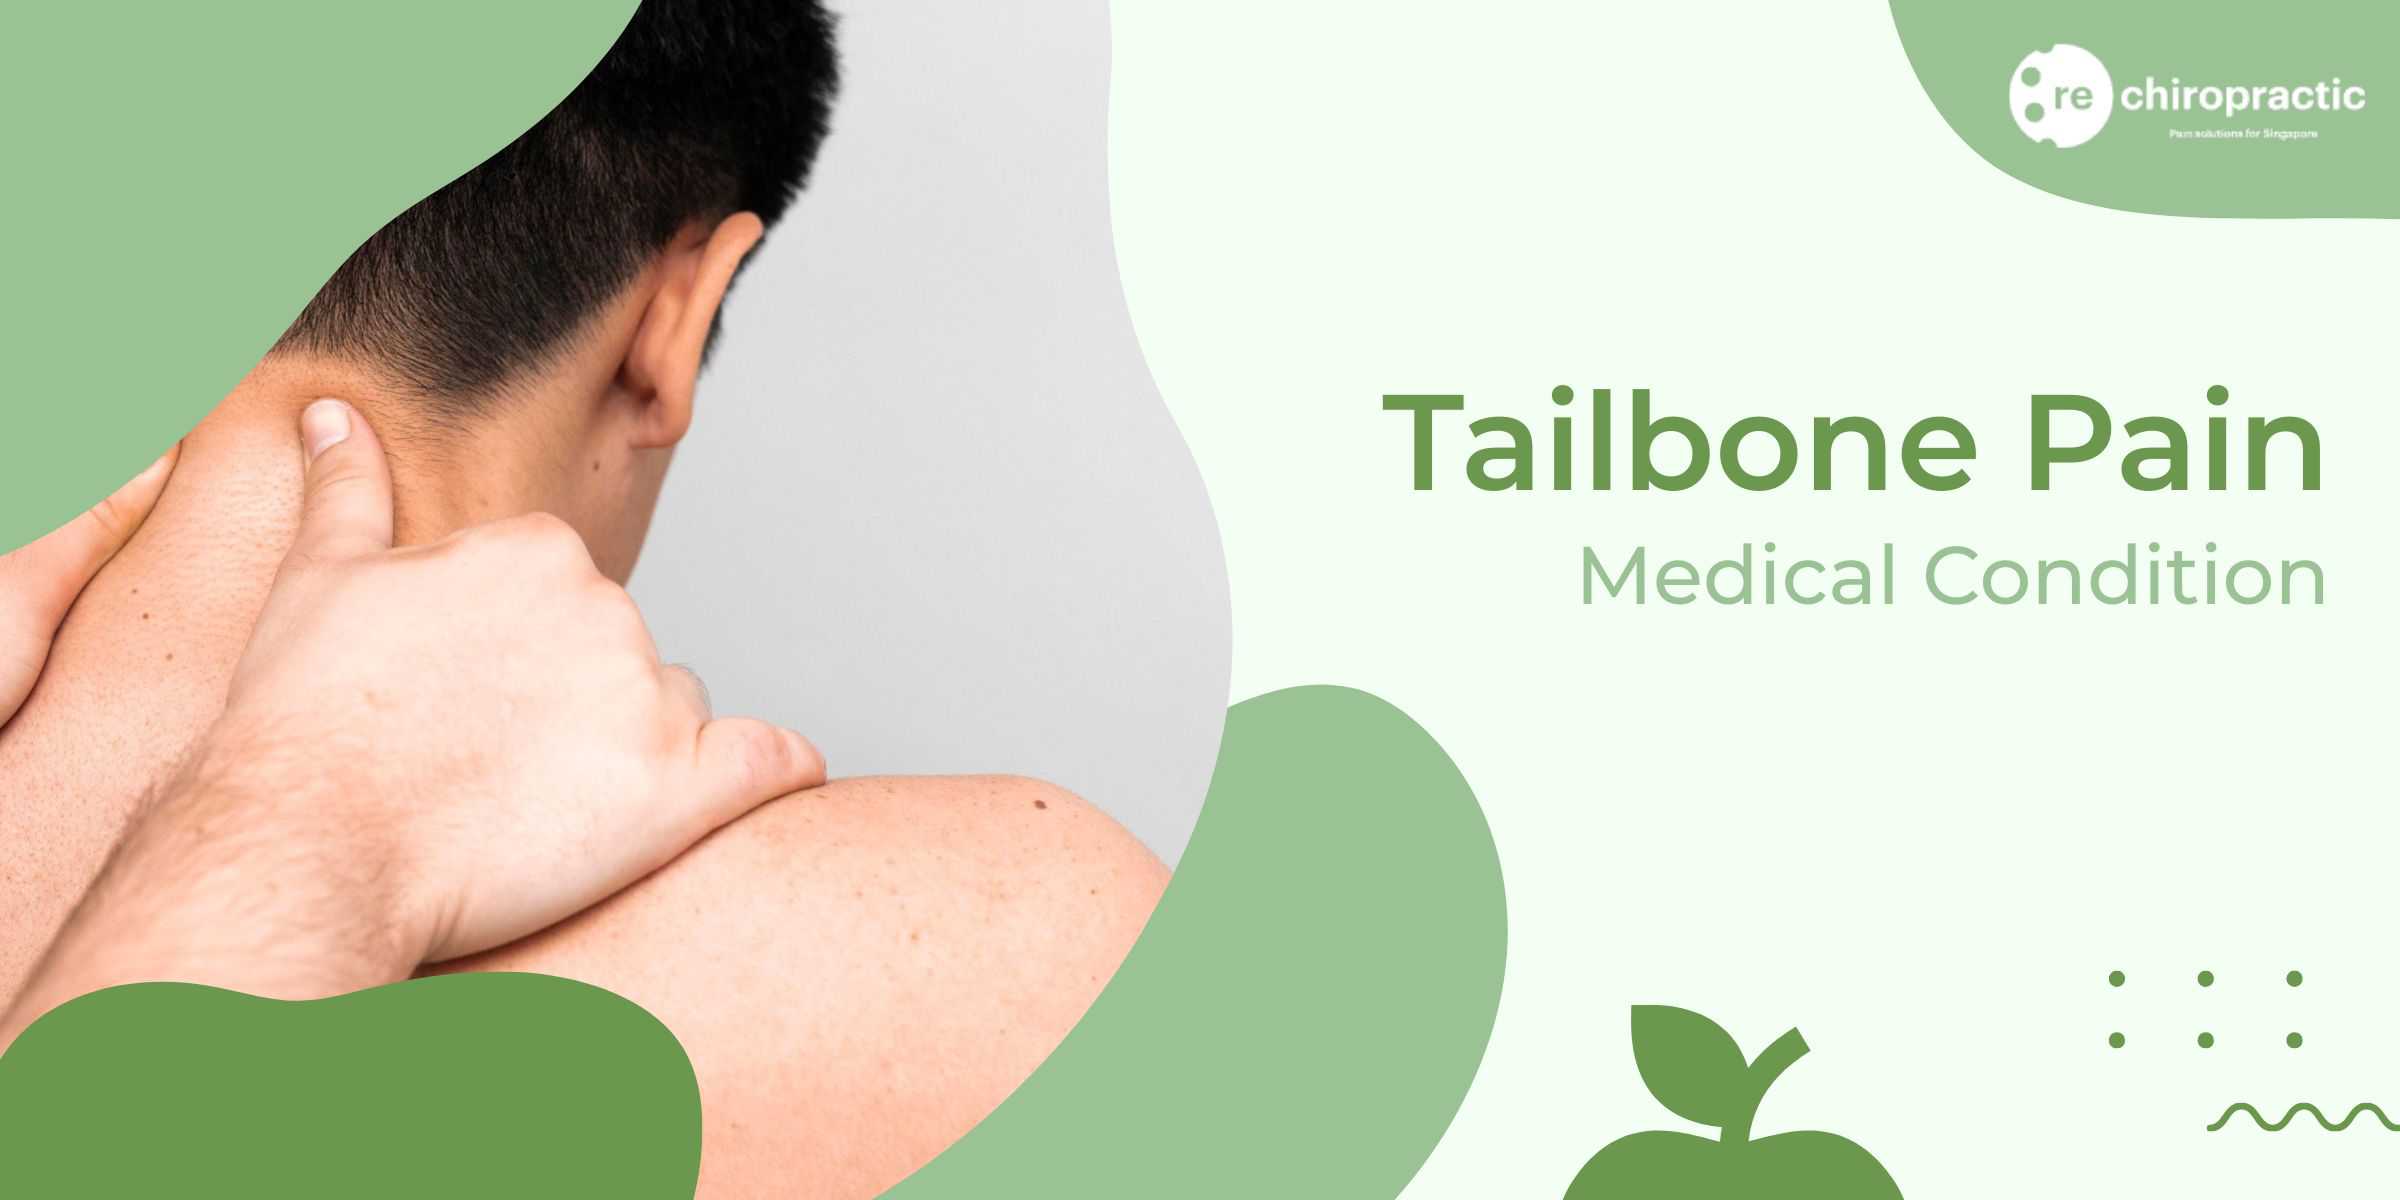 Tailbone Pain: Causes, Symptoms, Self-Help & Chiropractic Treatments -  Re:Chiropractic